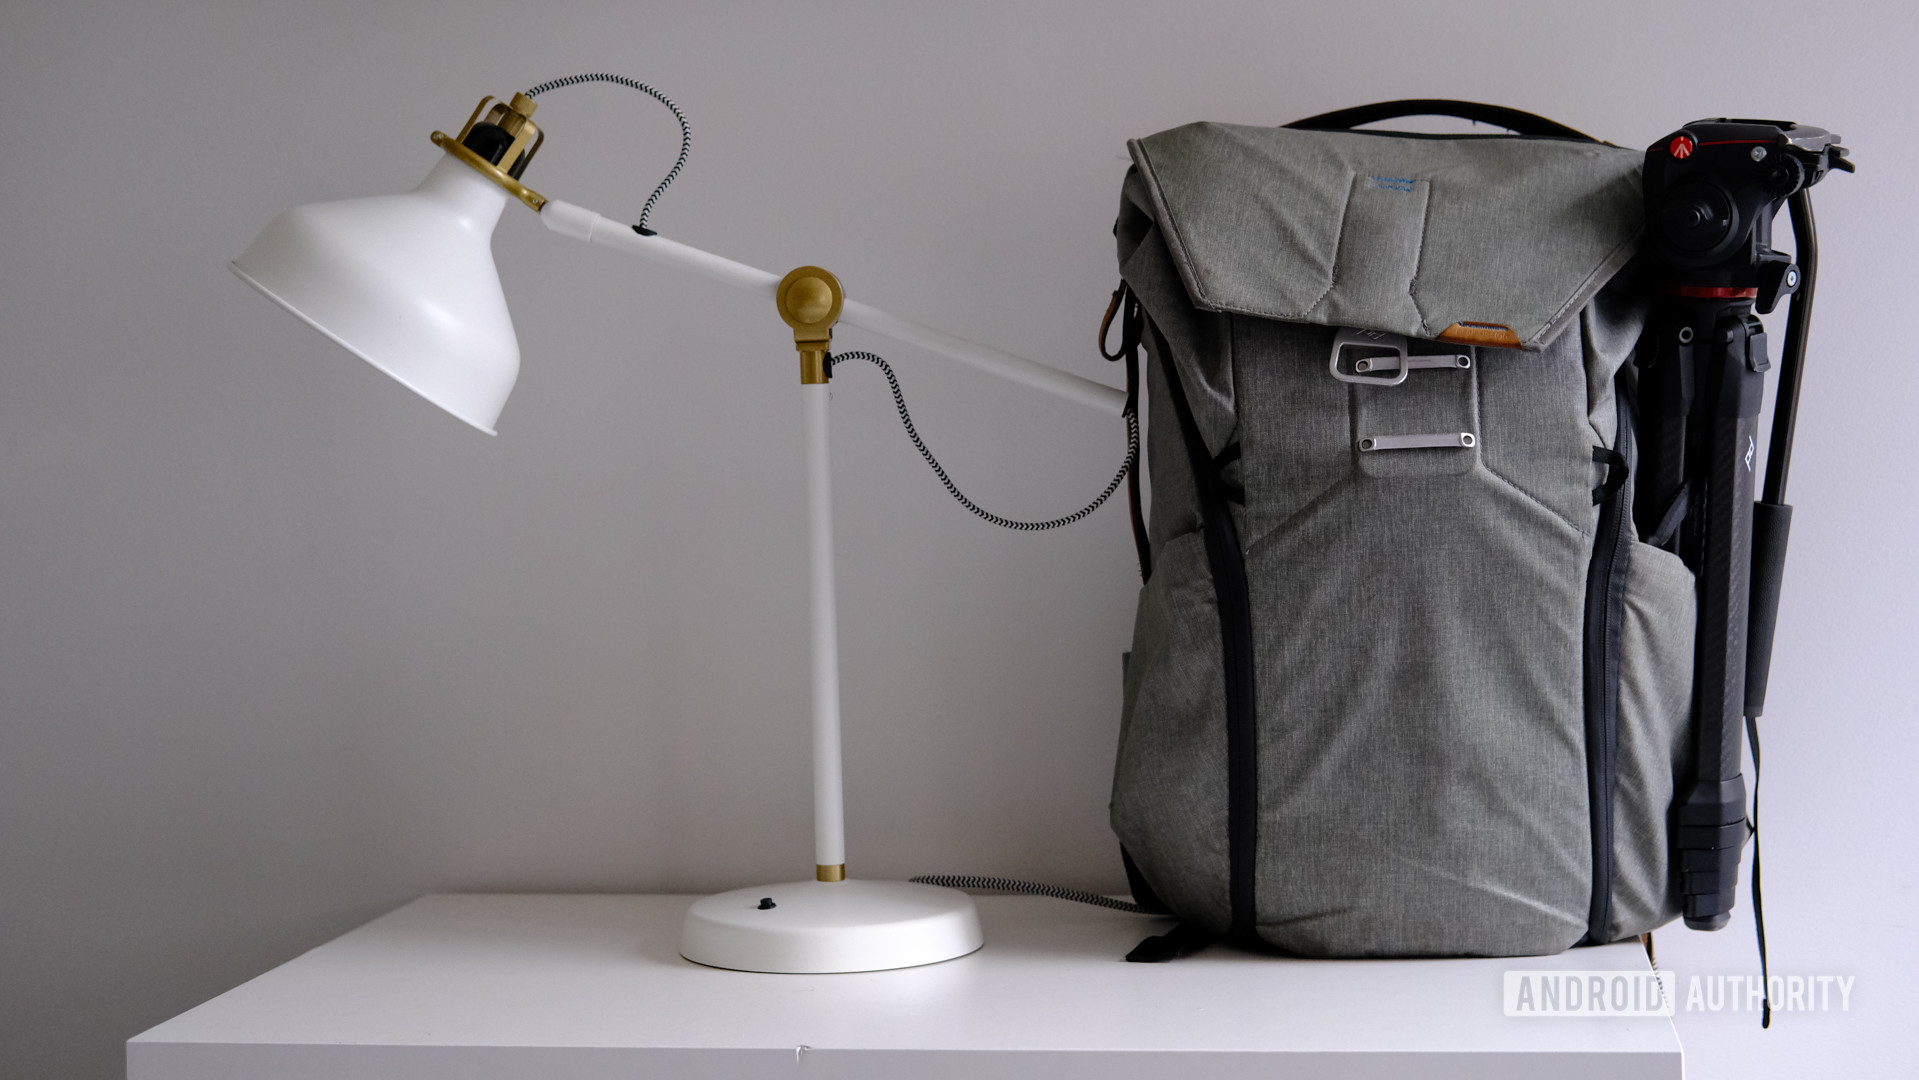 Peak Design Everyday Backpack 30L on table next to a desk lamp.